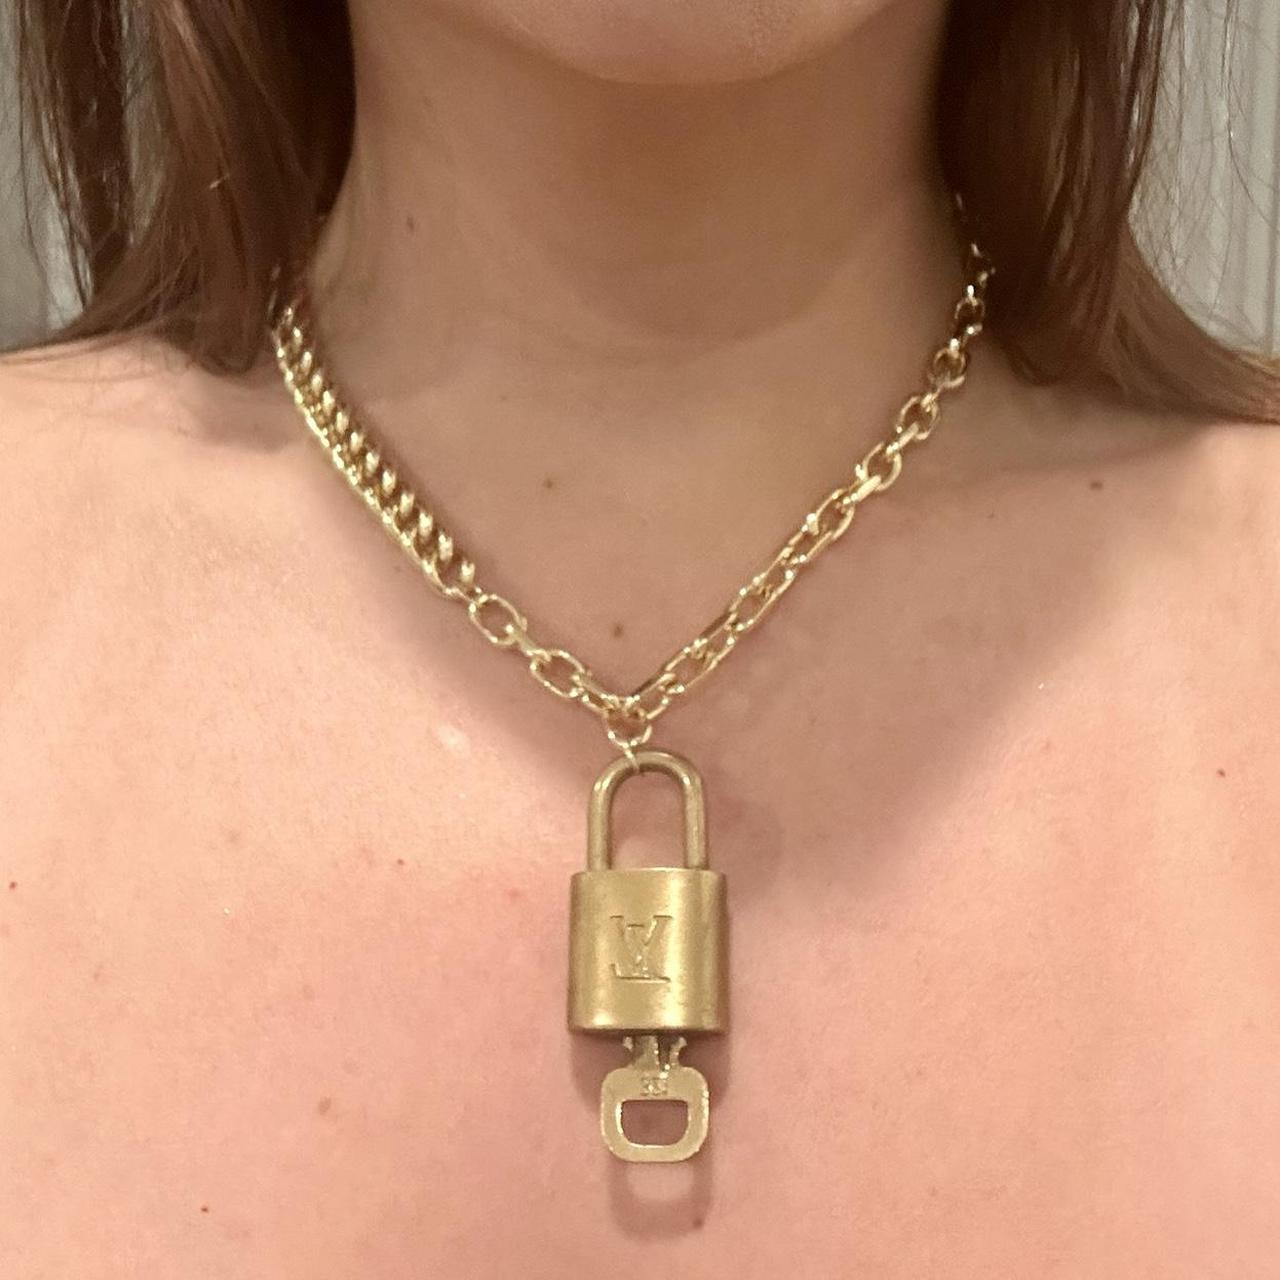 reworked lv necklace